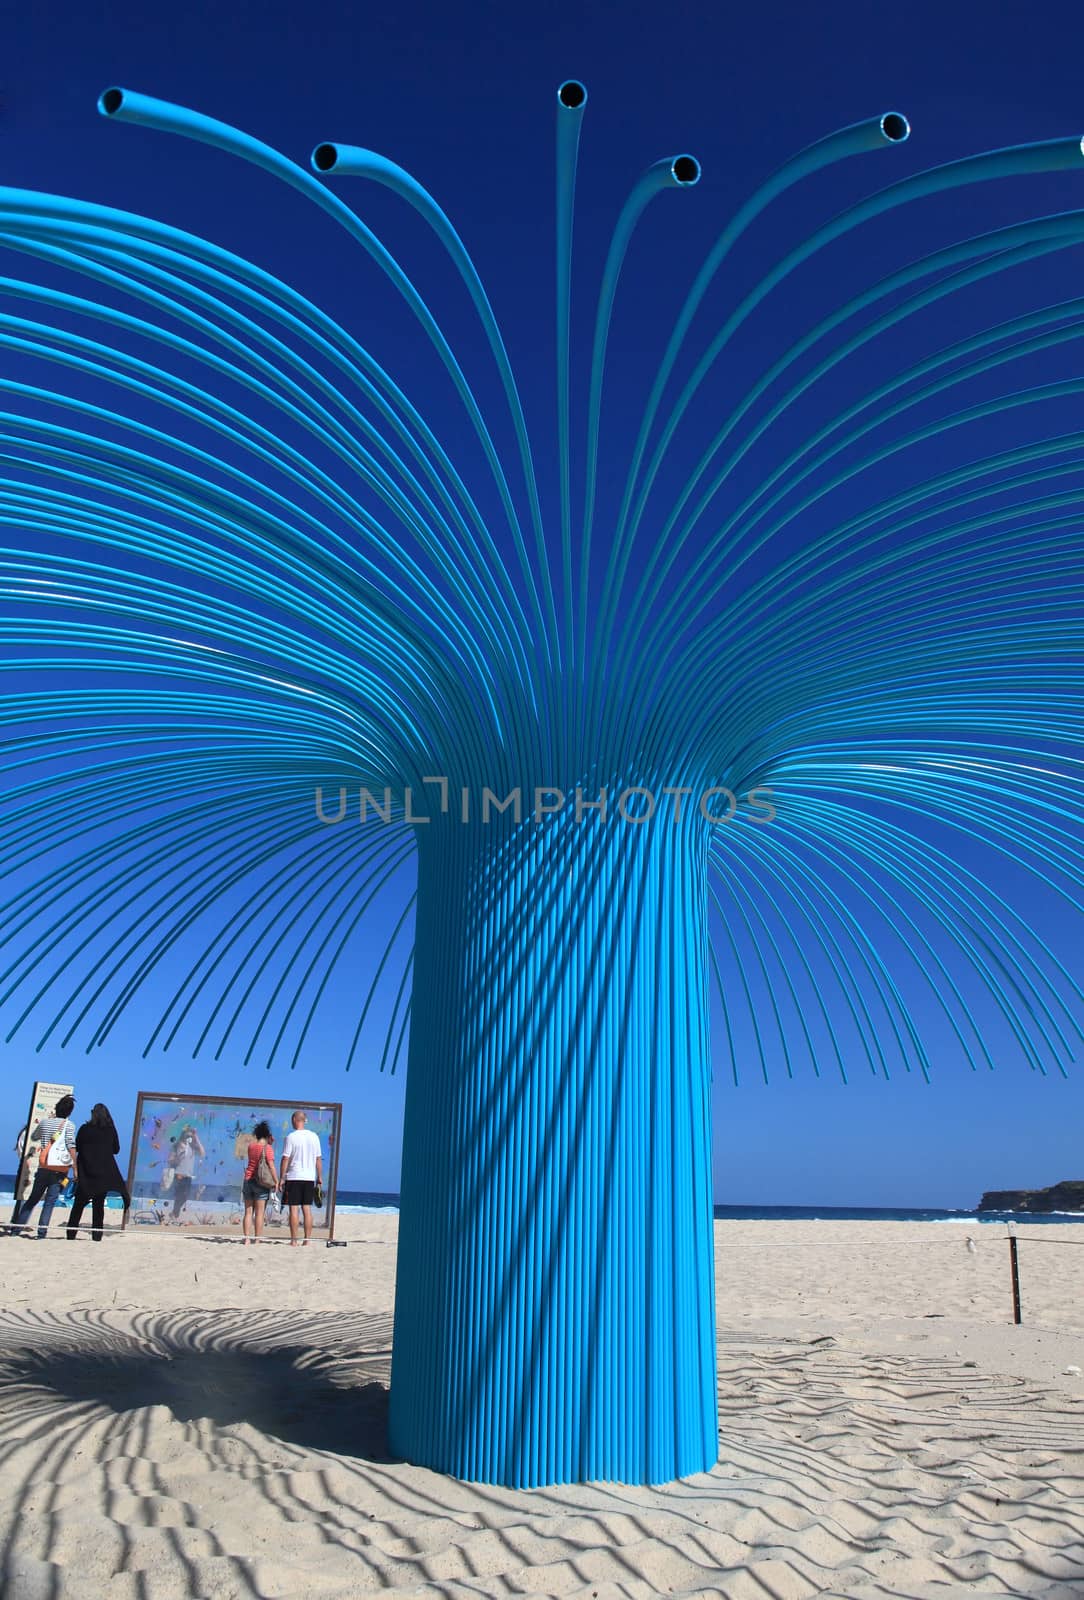 BONDI BEACH, AUSTRALIA - OCTOBER 30, 2013: Sculpture By The Sea, Bondi 2013. Annual event that showcases artists from around the world  Sculpture titled 'Look at me' by Rebecca Rose
Focus to centre